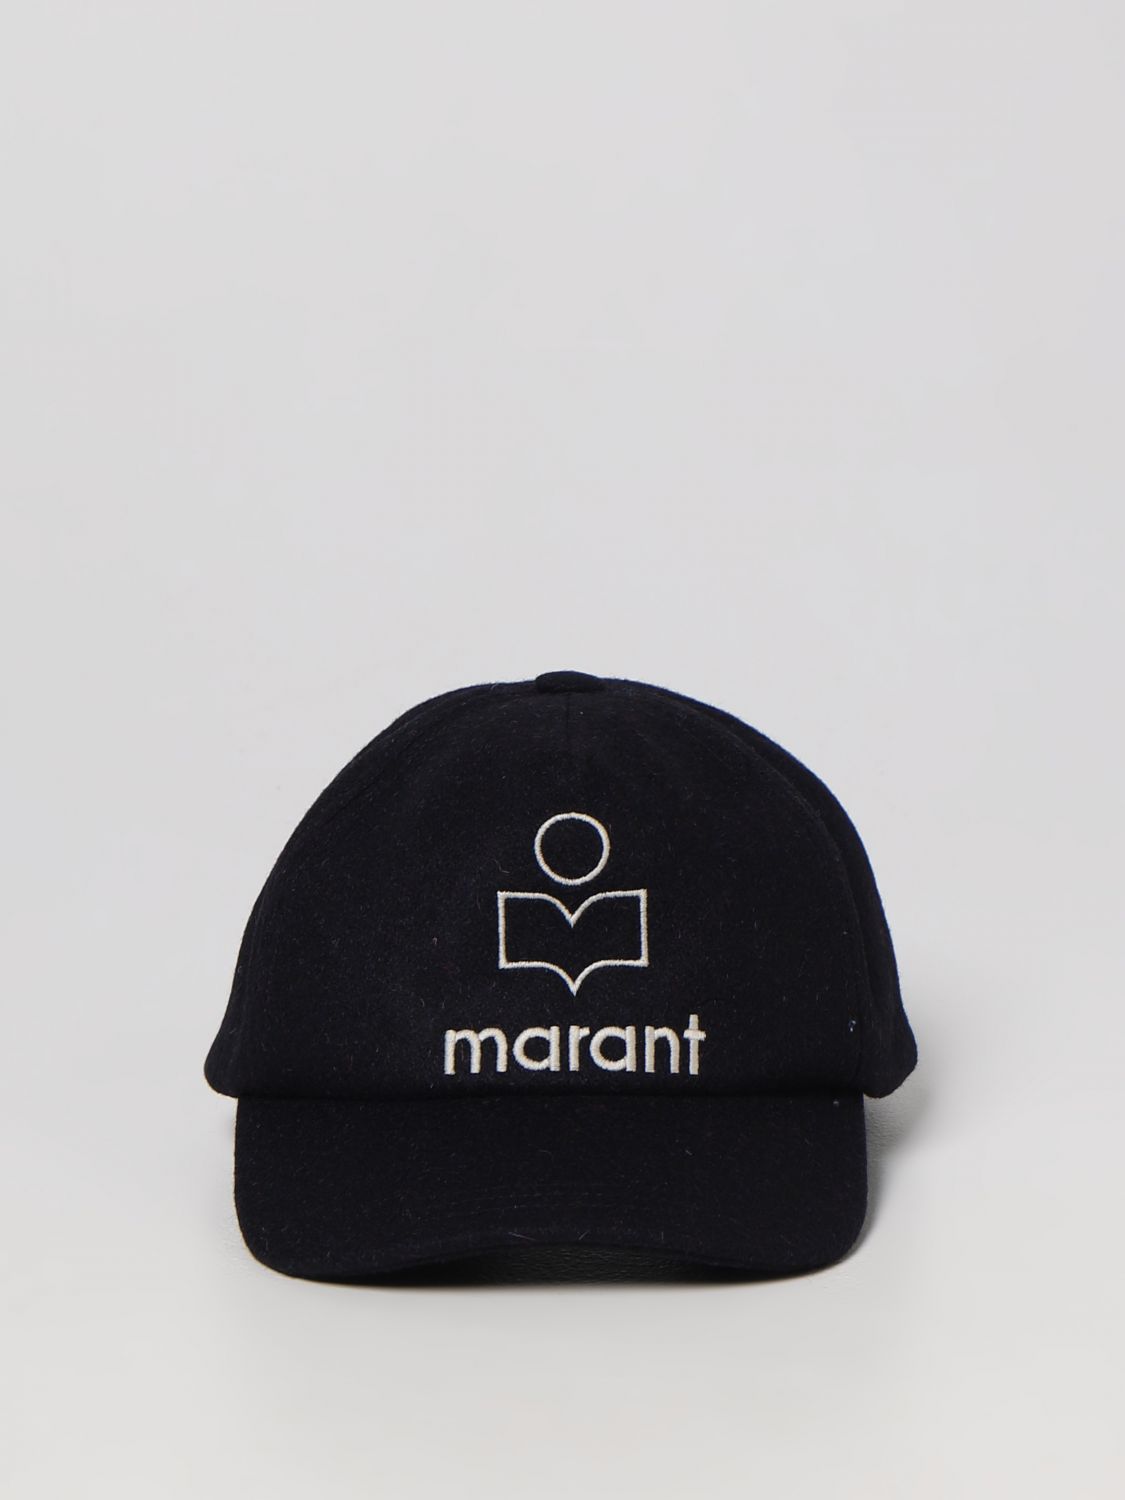 Isabel Marant hat for woman